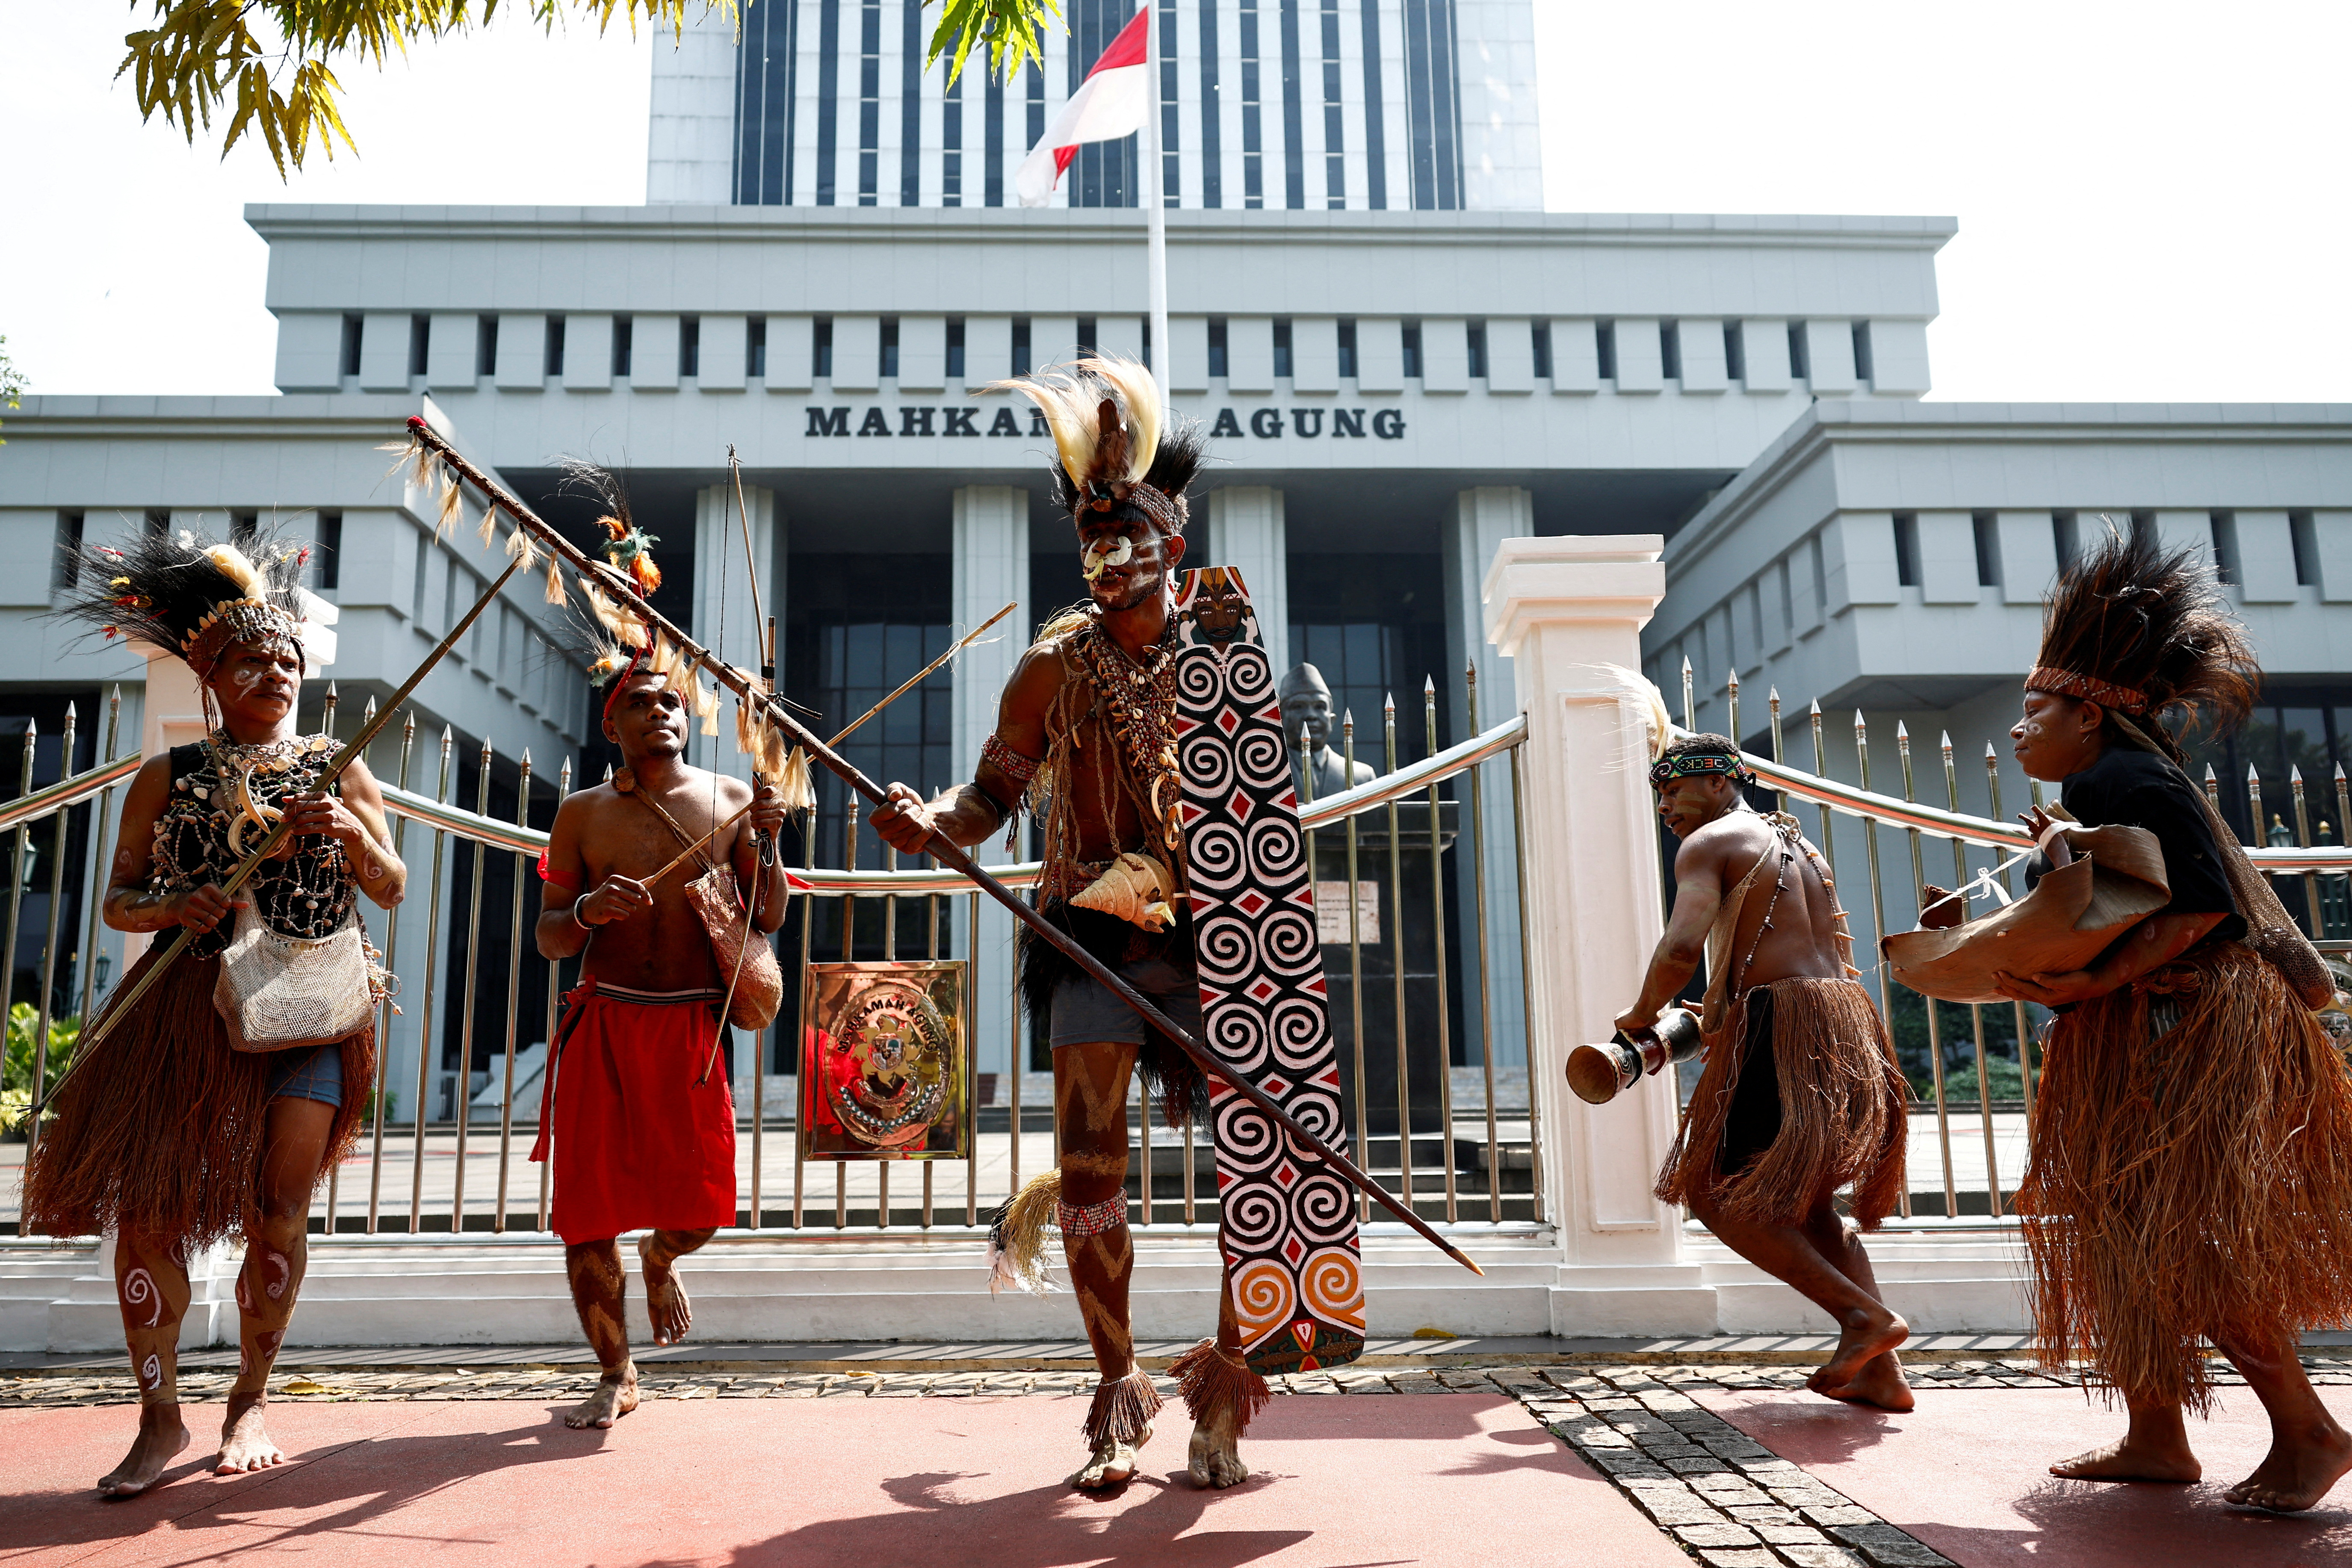 Protest against deforestation in indigenous Papuans' land, outside the country's Supreme Court in Jakarta